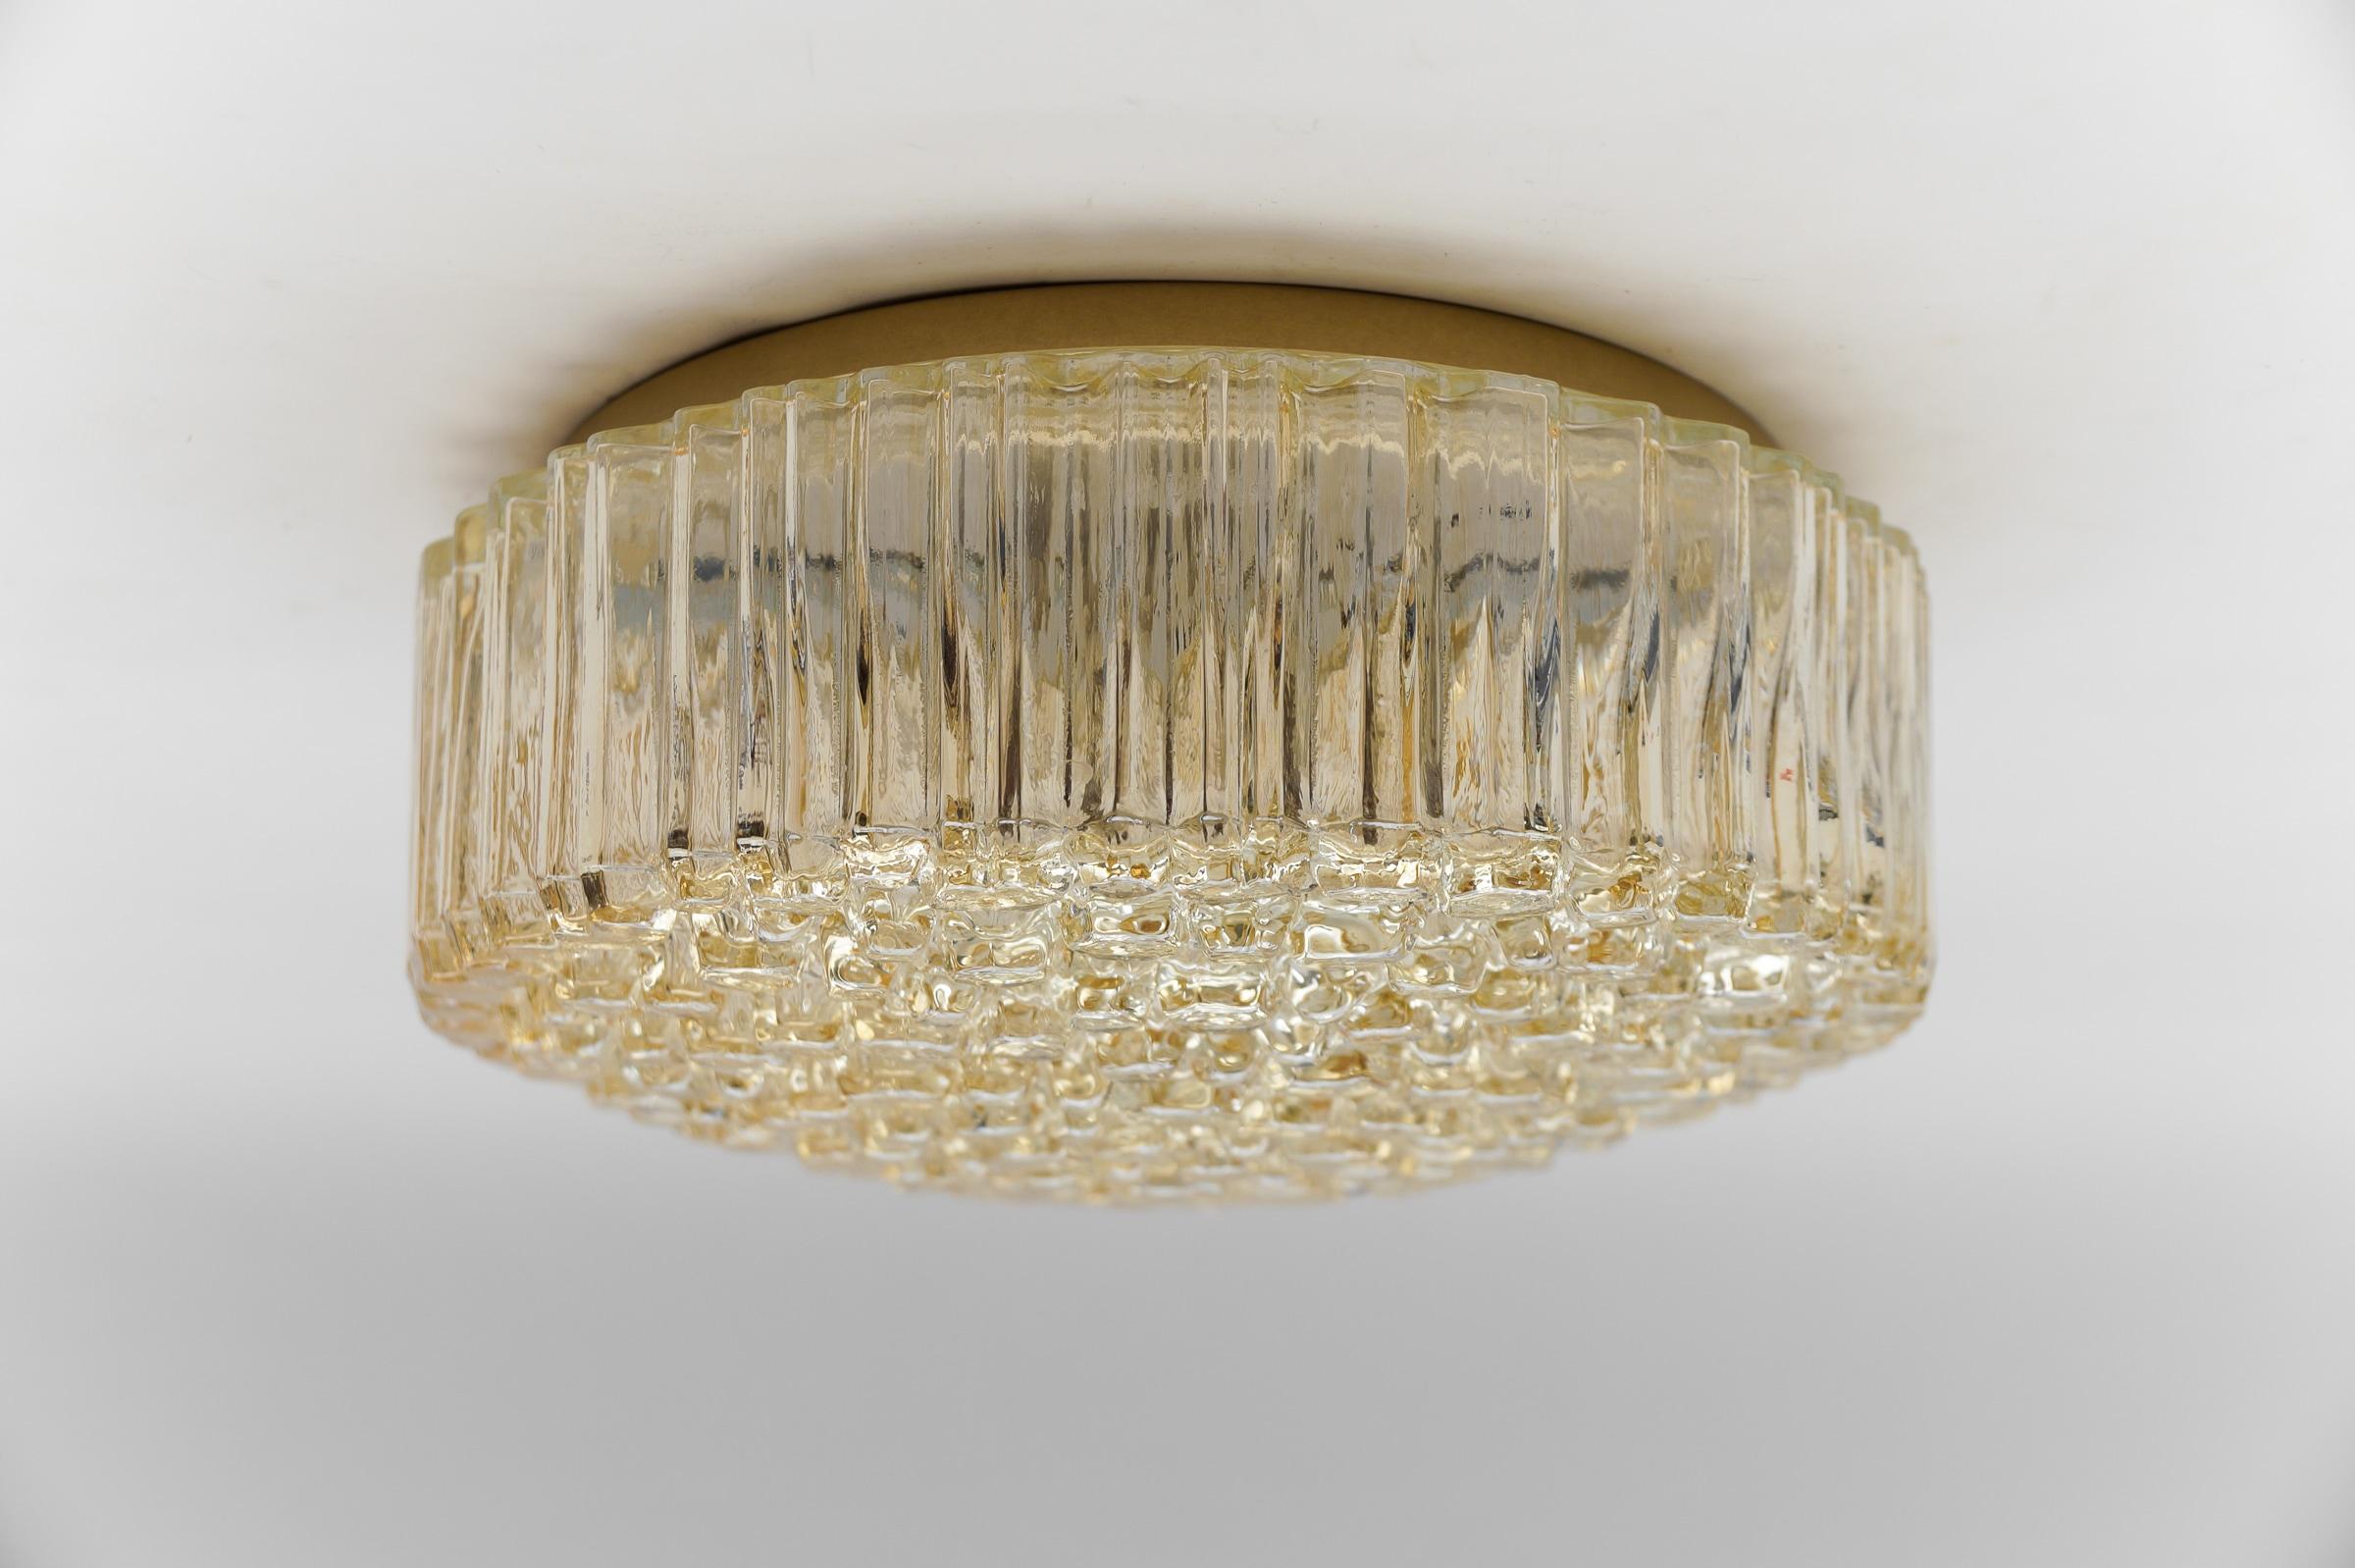 Lovely Large Amber Bubble Glass Flush Mount Lamp by Helena Tynell for Limburg, Germany, 1960s

Each fixture need 1 x E27 standard bulb with 60W max.

Light bulbs are not included. 

It is possible to install this fixture in all countries (US,